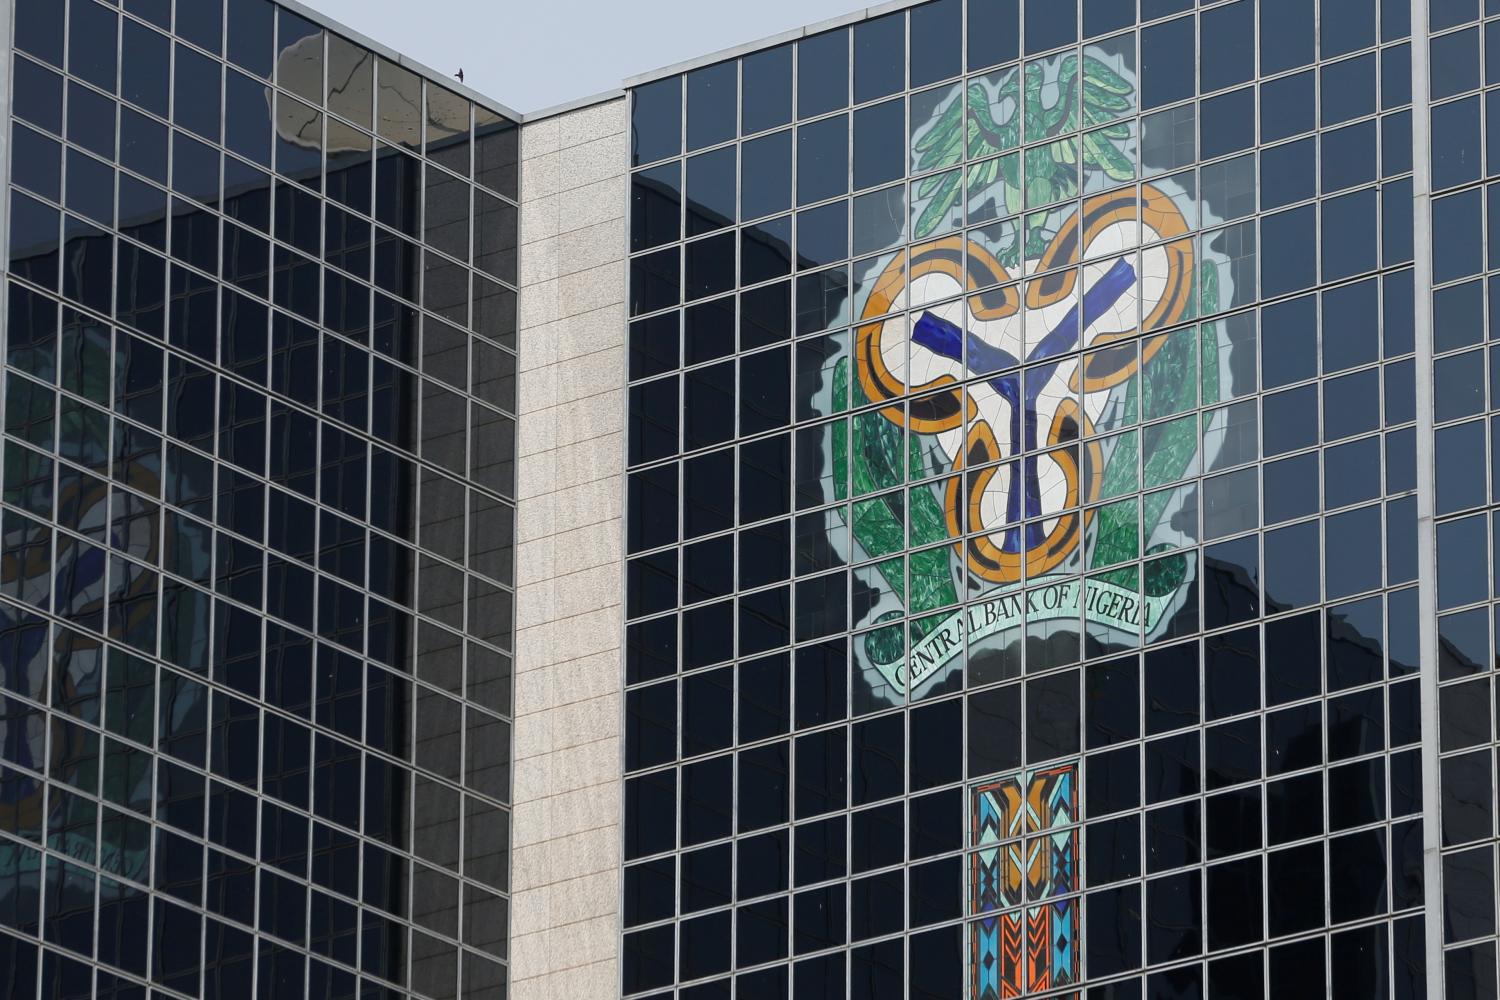 FILE PHOTO: The Central Bank of Nigeria's logo is seen on its headquarters building in Abuja, Nigeria, January 22, 2018. REUTERS/Afolabi Sotunde/File Photo